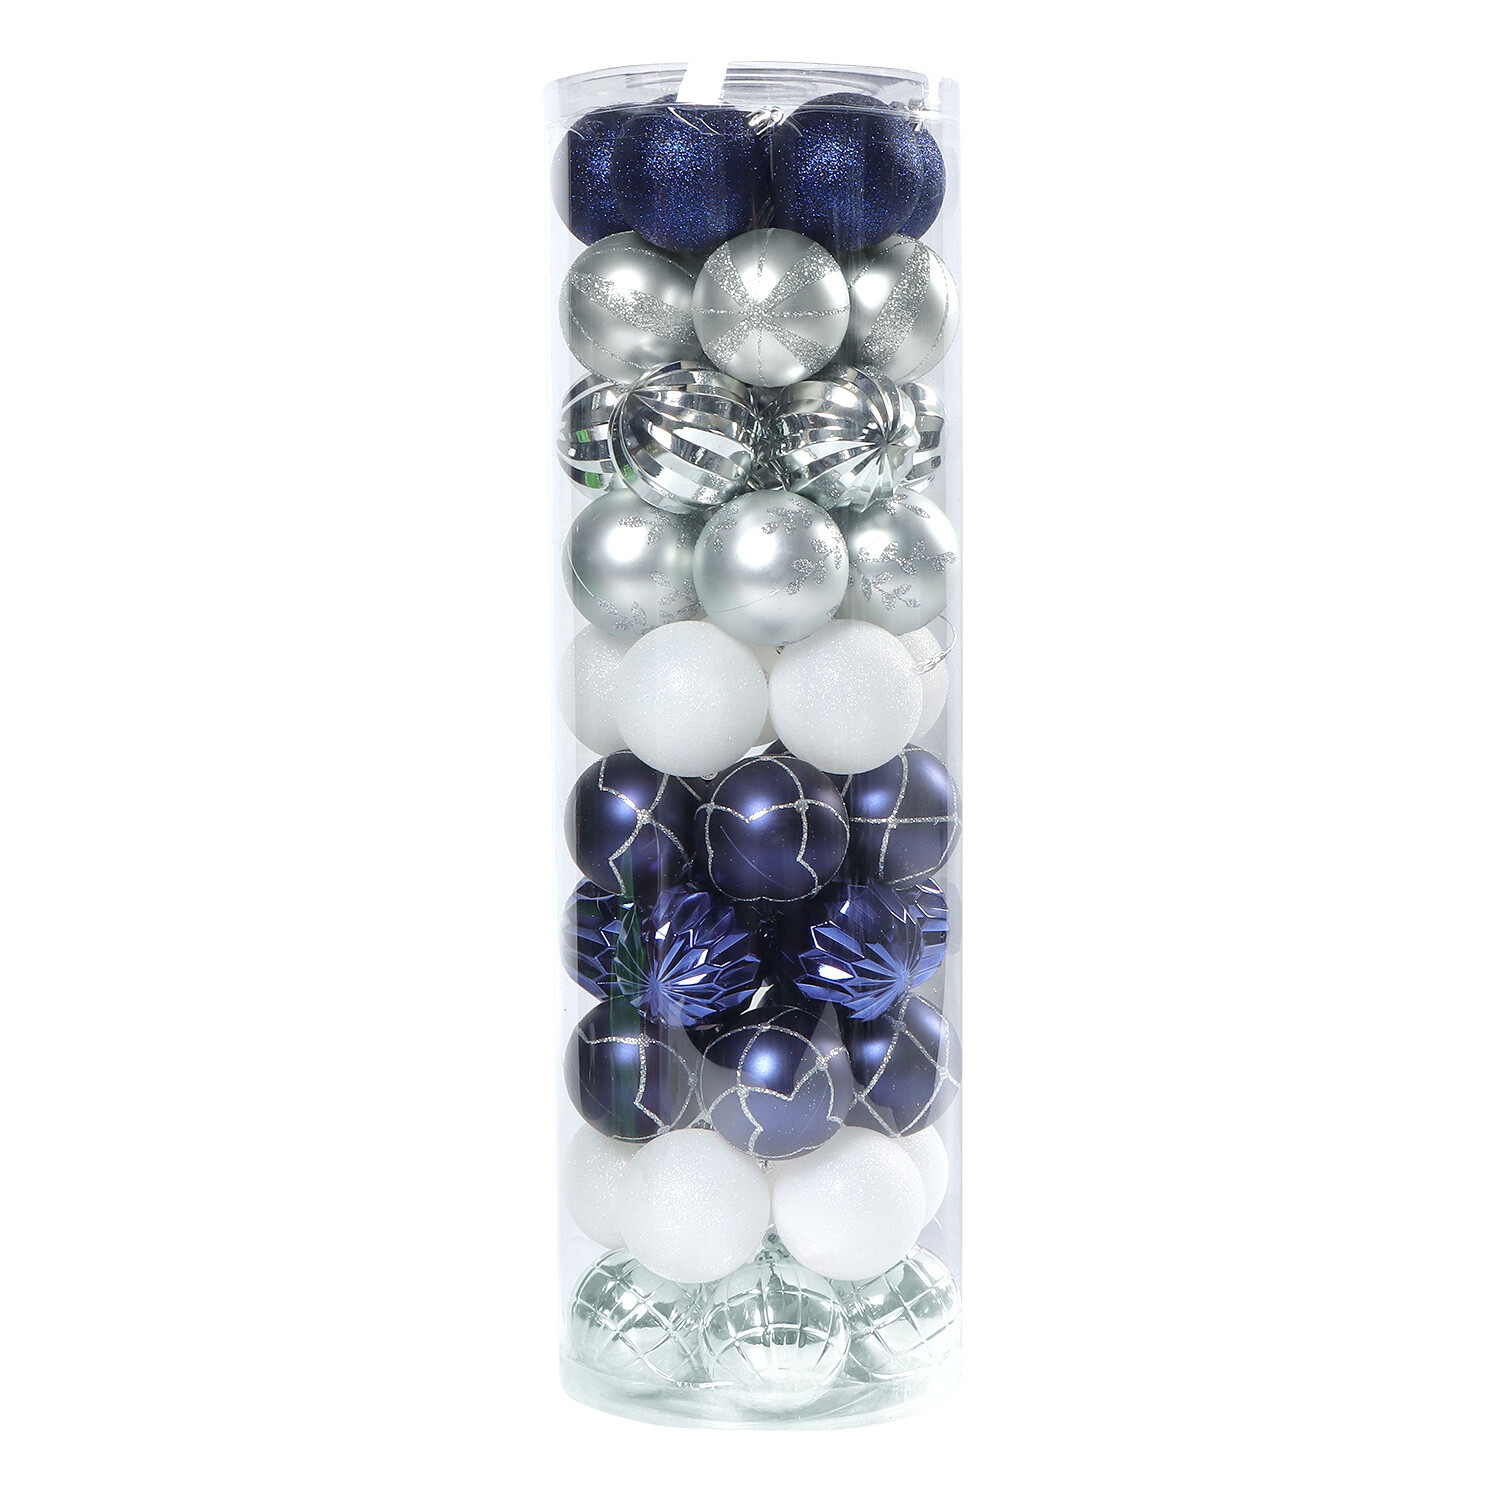 Pack of 50 Midnight Fantasy Baubles - Navy Image